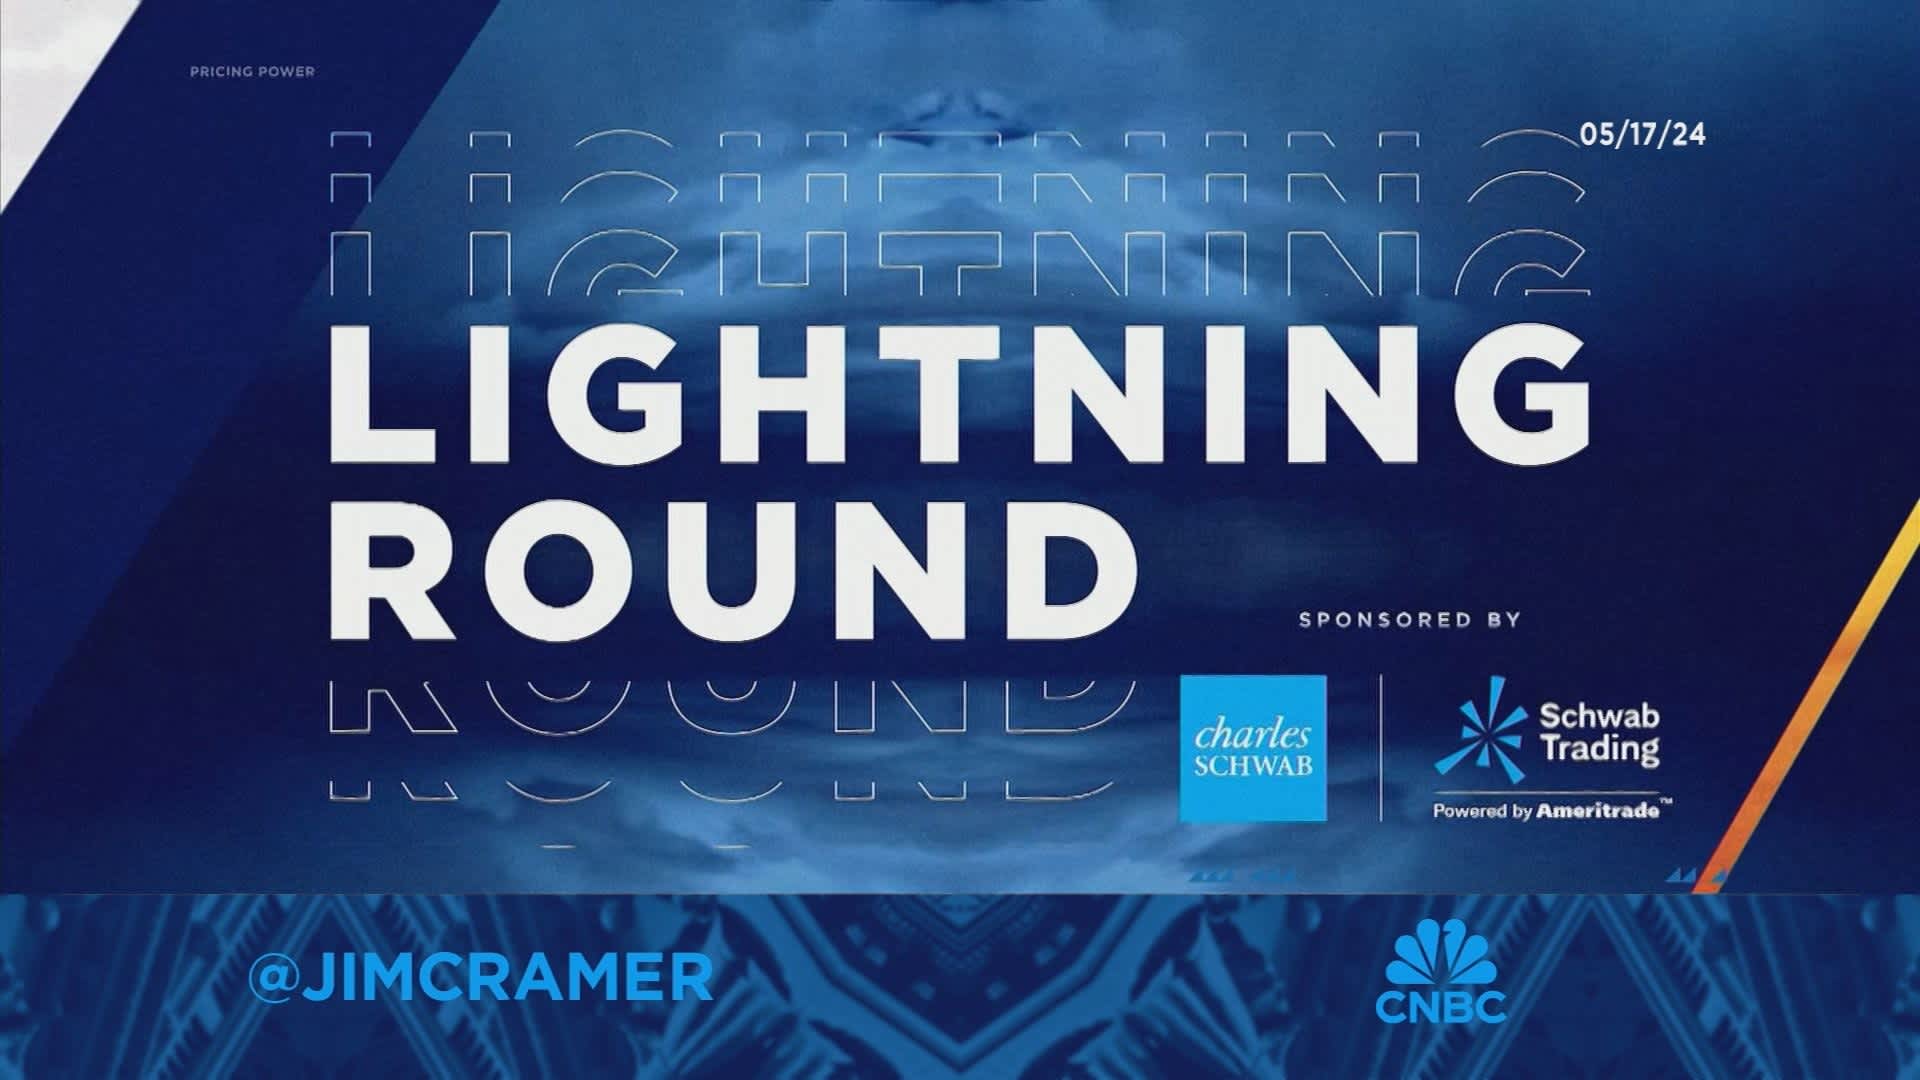 Lightning Round: Sprouts Farmers Market is a ‘juggernaut’, says Jim Cramer [Video]